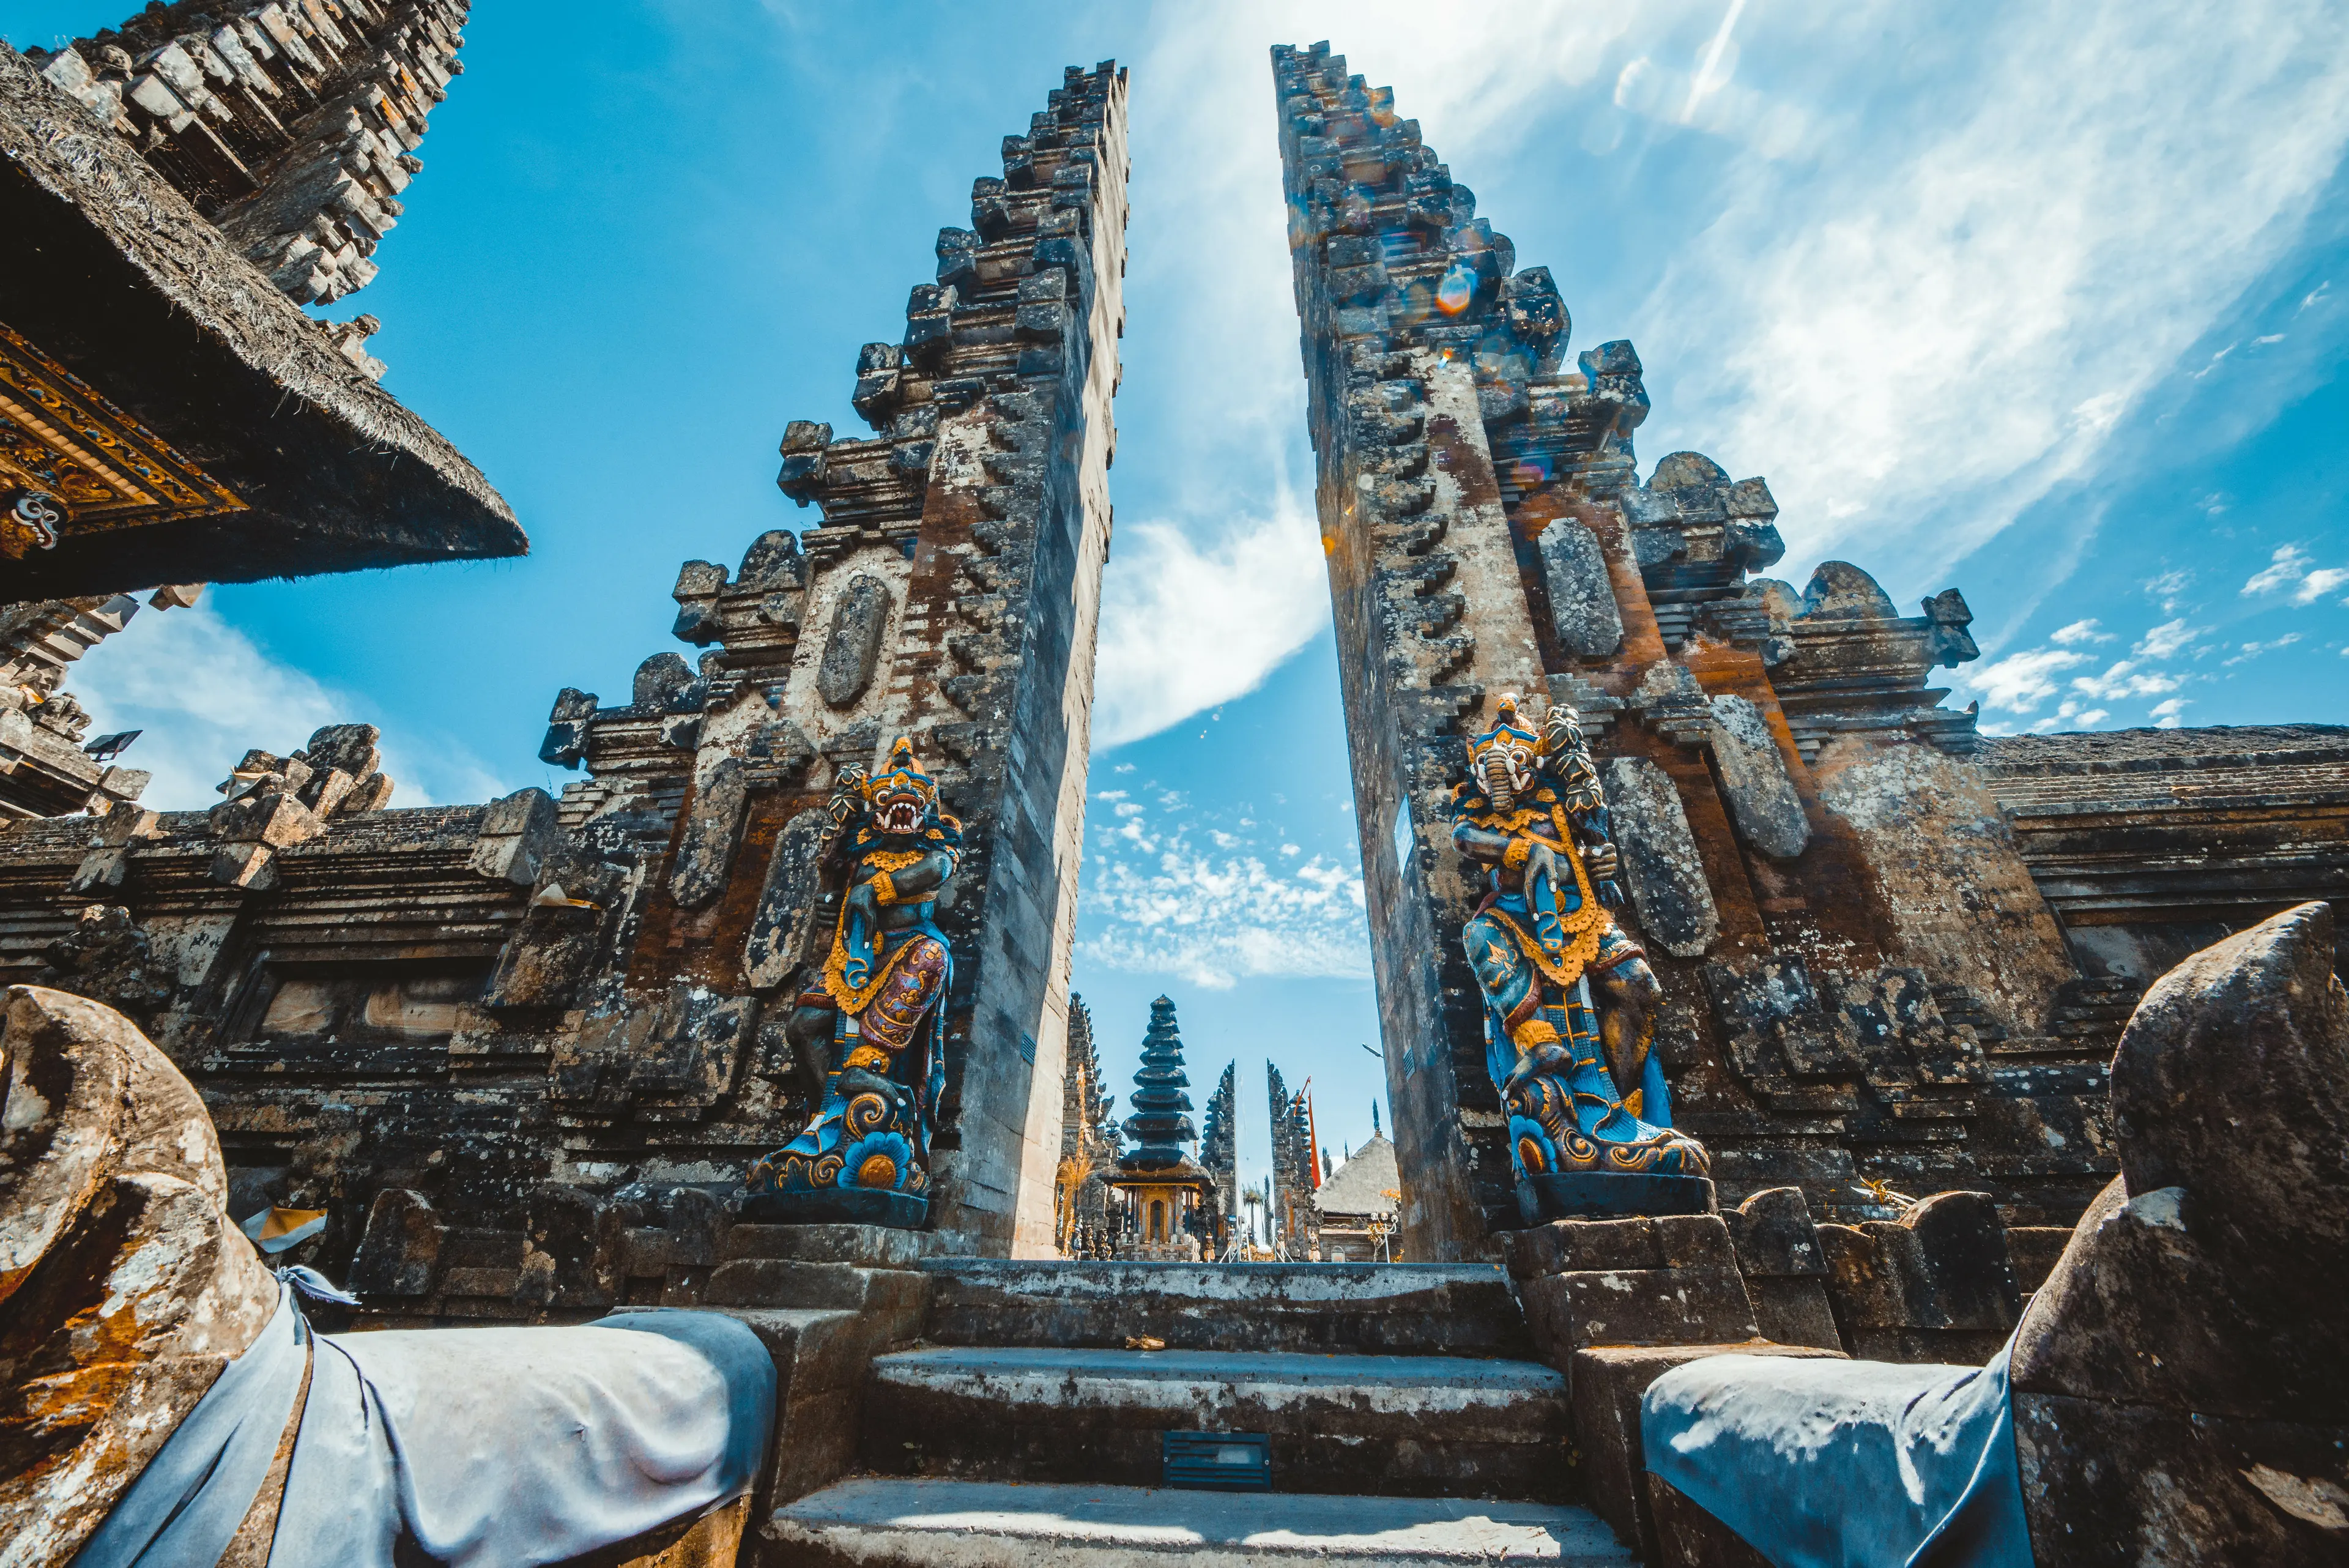 2-Day Bali Itinerary: Relaxing & Shopping Retreat with Friends